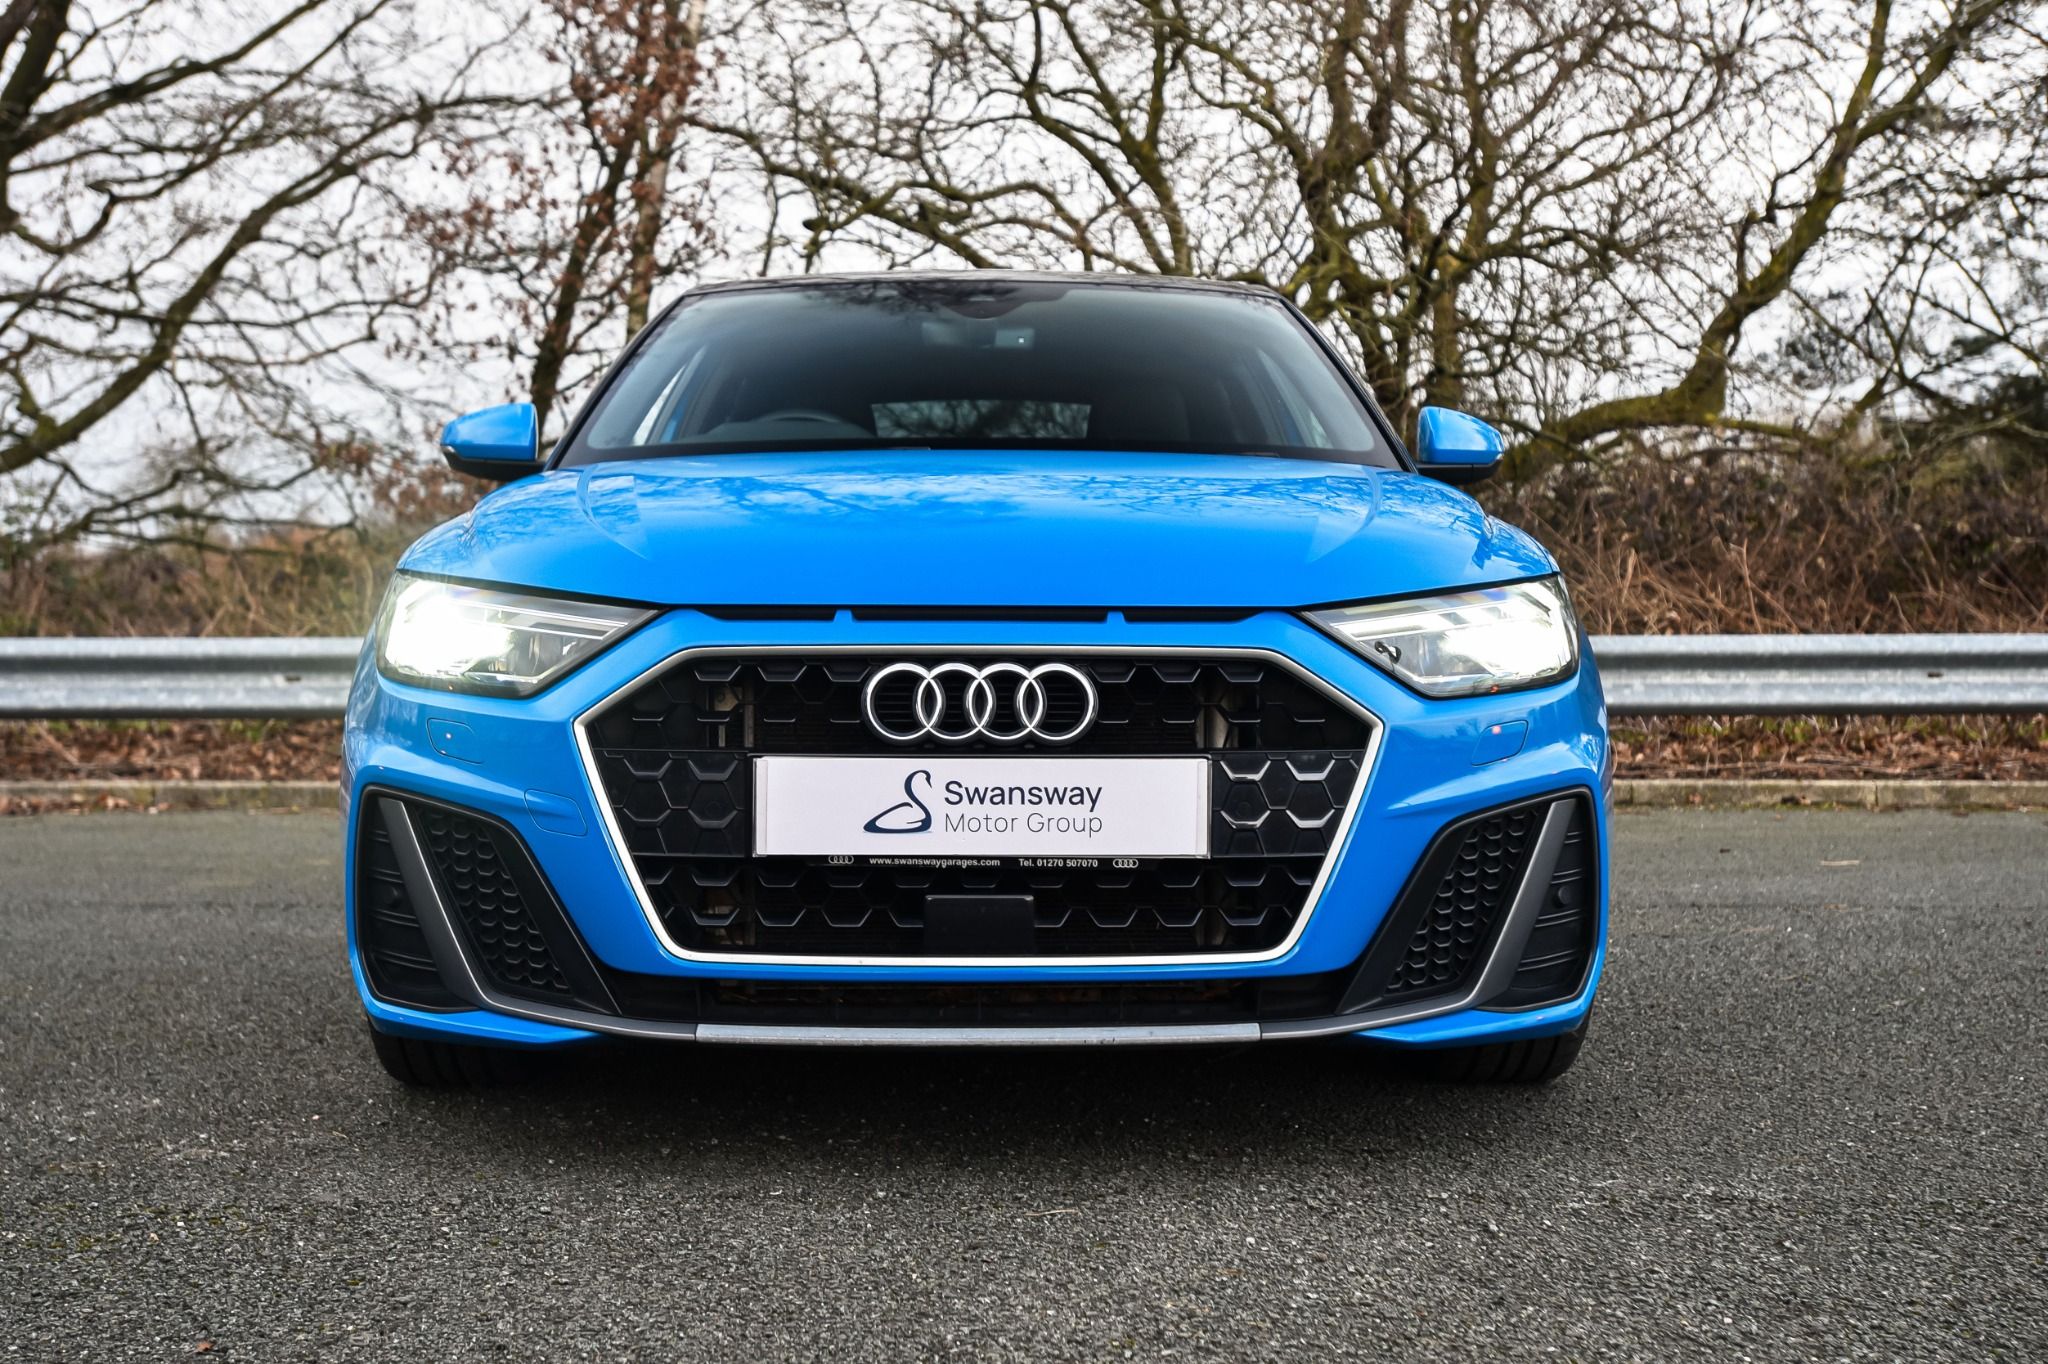 Front on view of blue Audi A1 Sportback